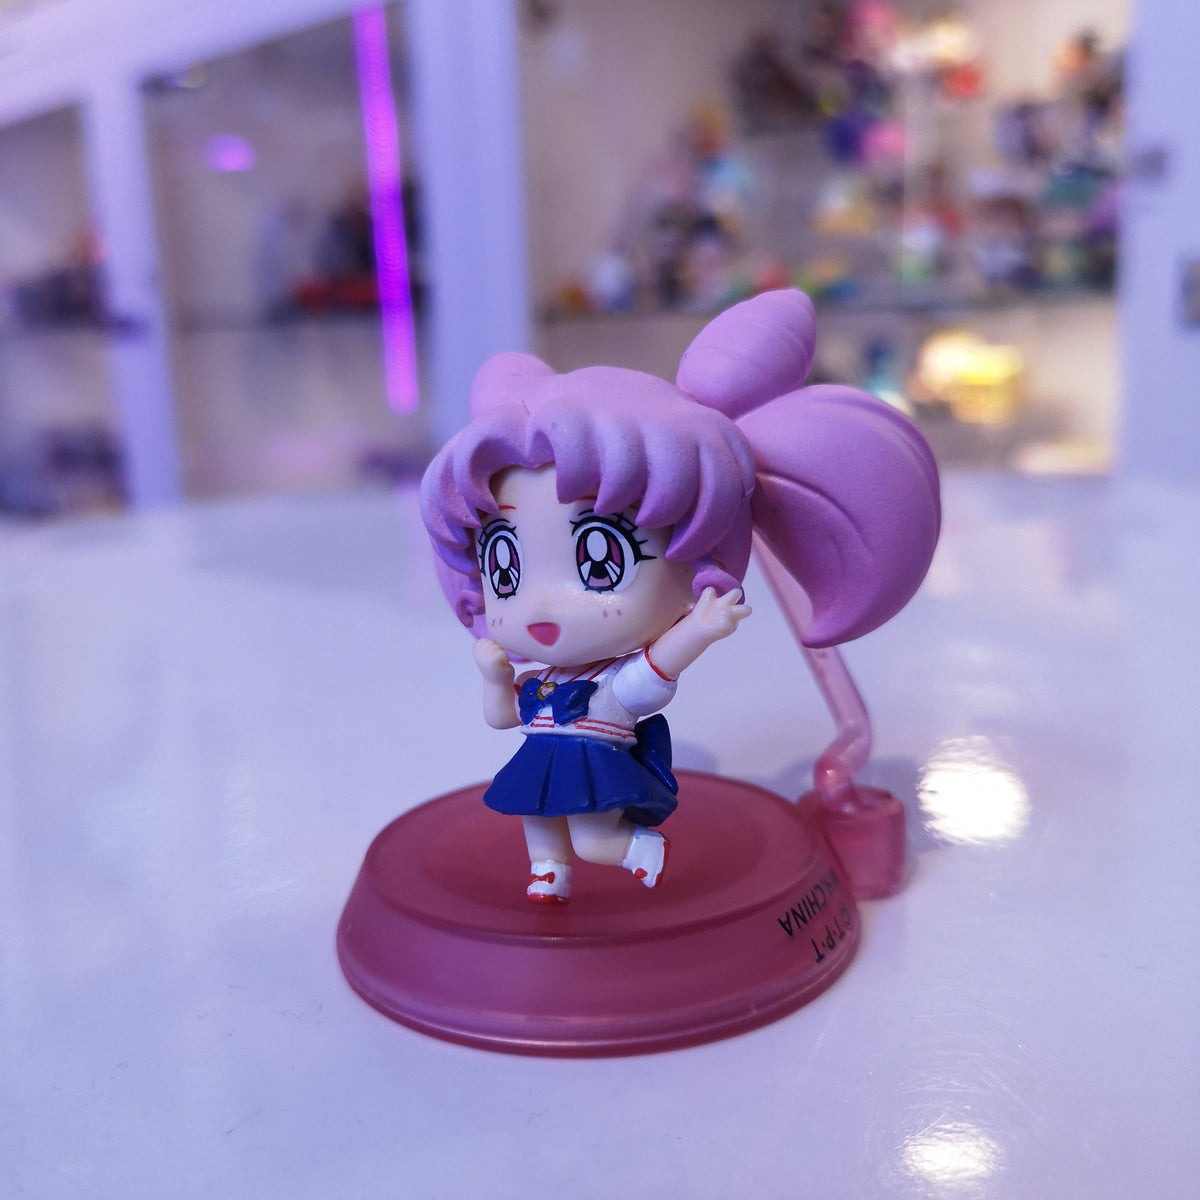 Sailor Moon petit character figure by Megahouse